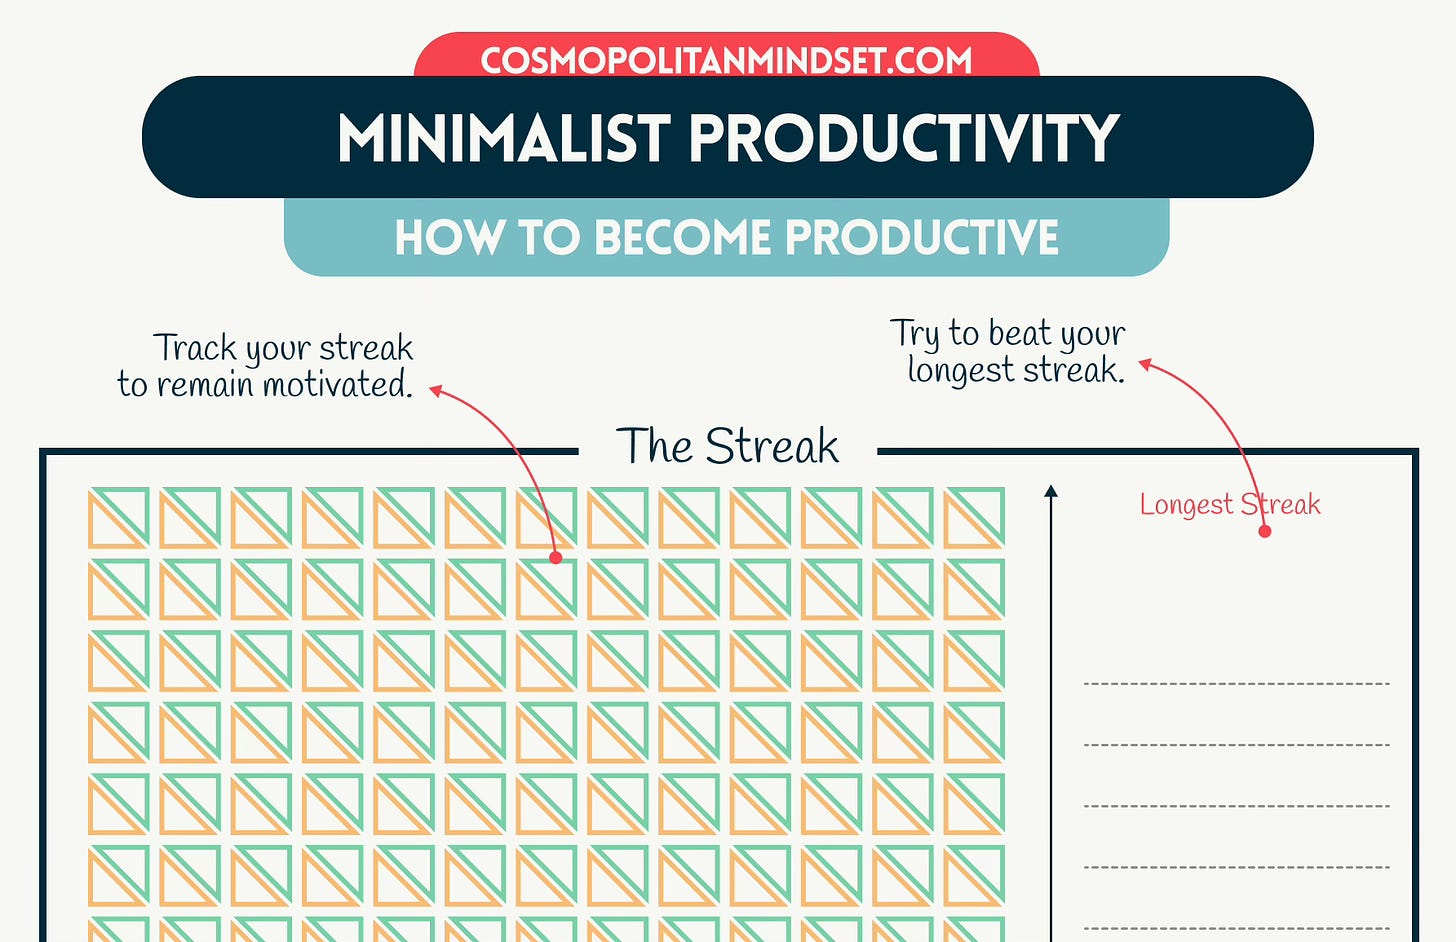 Minimalist Productivity — Hot to Become Productive Instructions